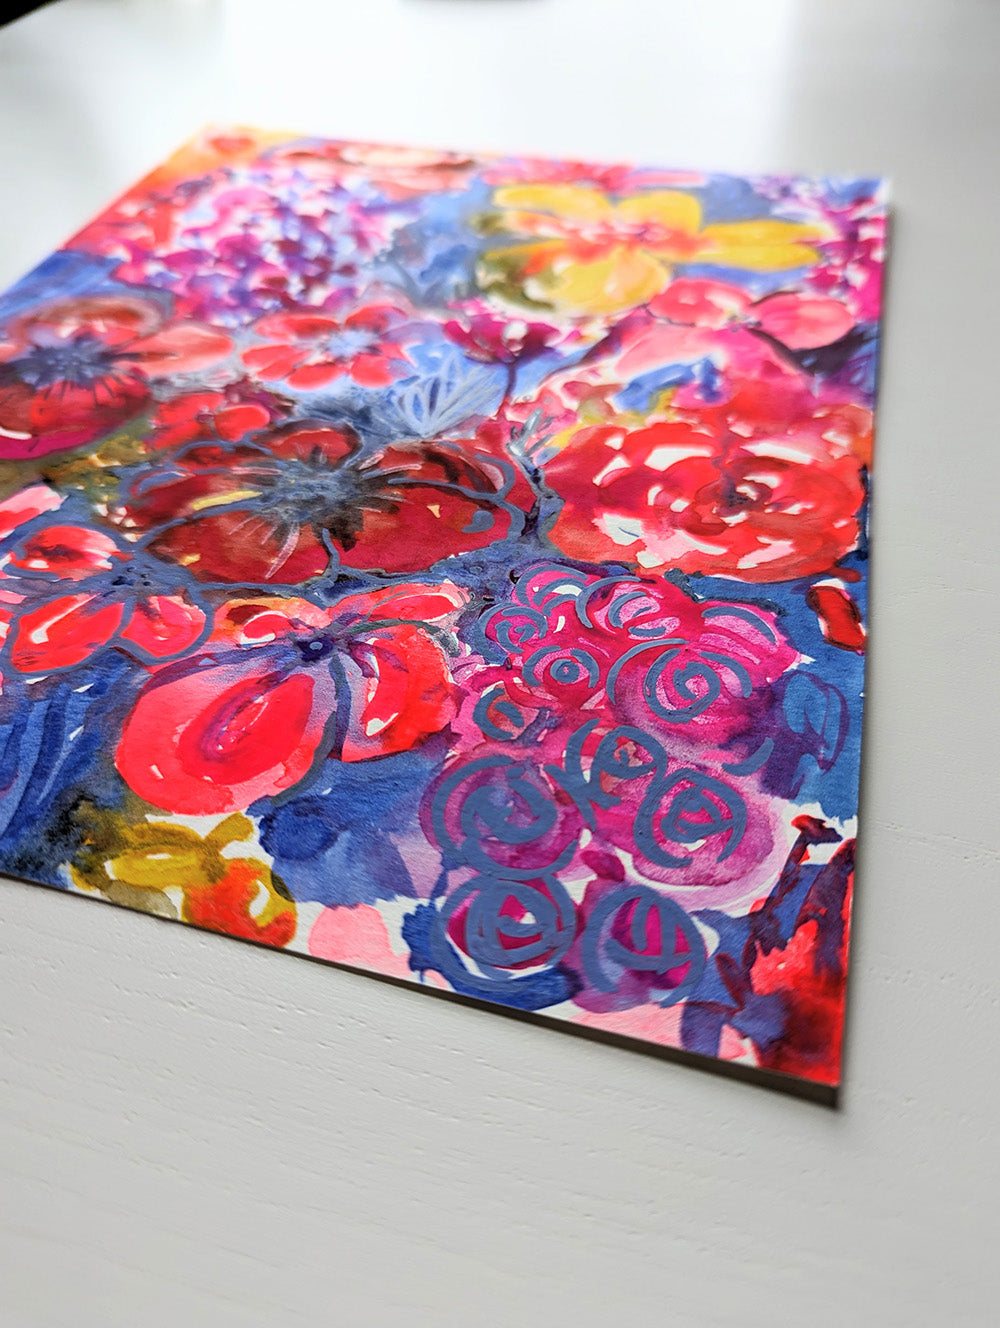 Neon Floral #4 - Original Painting by Briana Feola